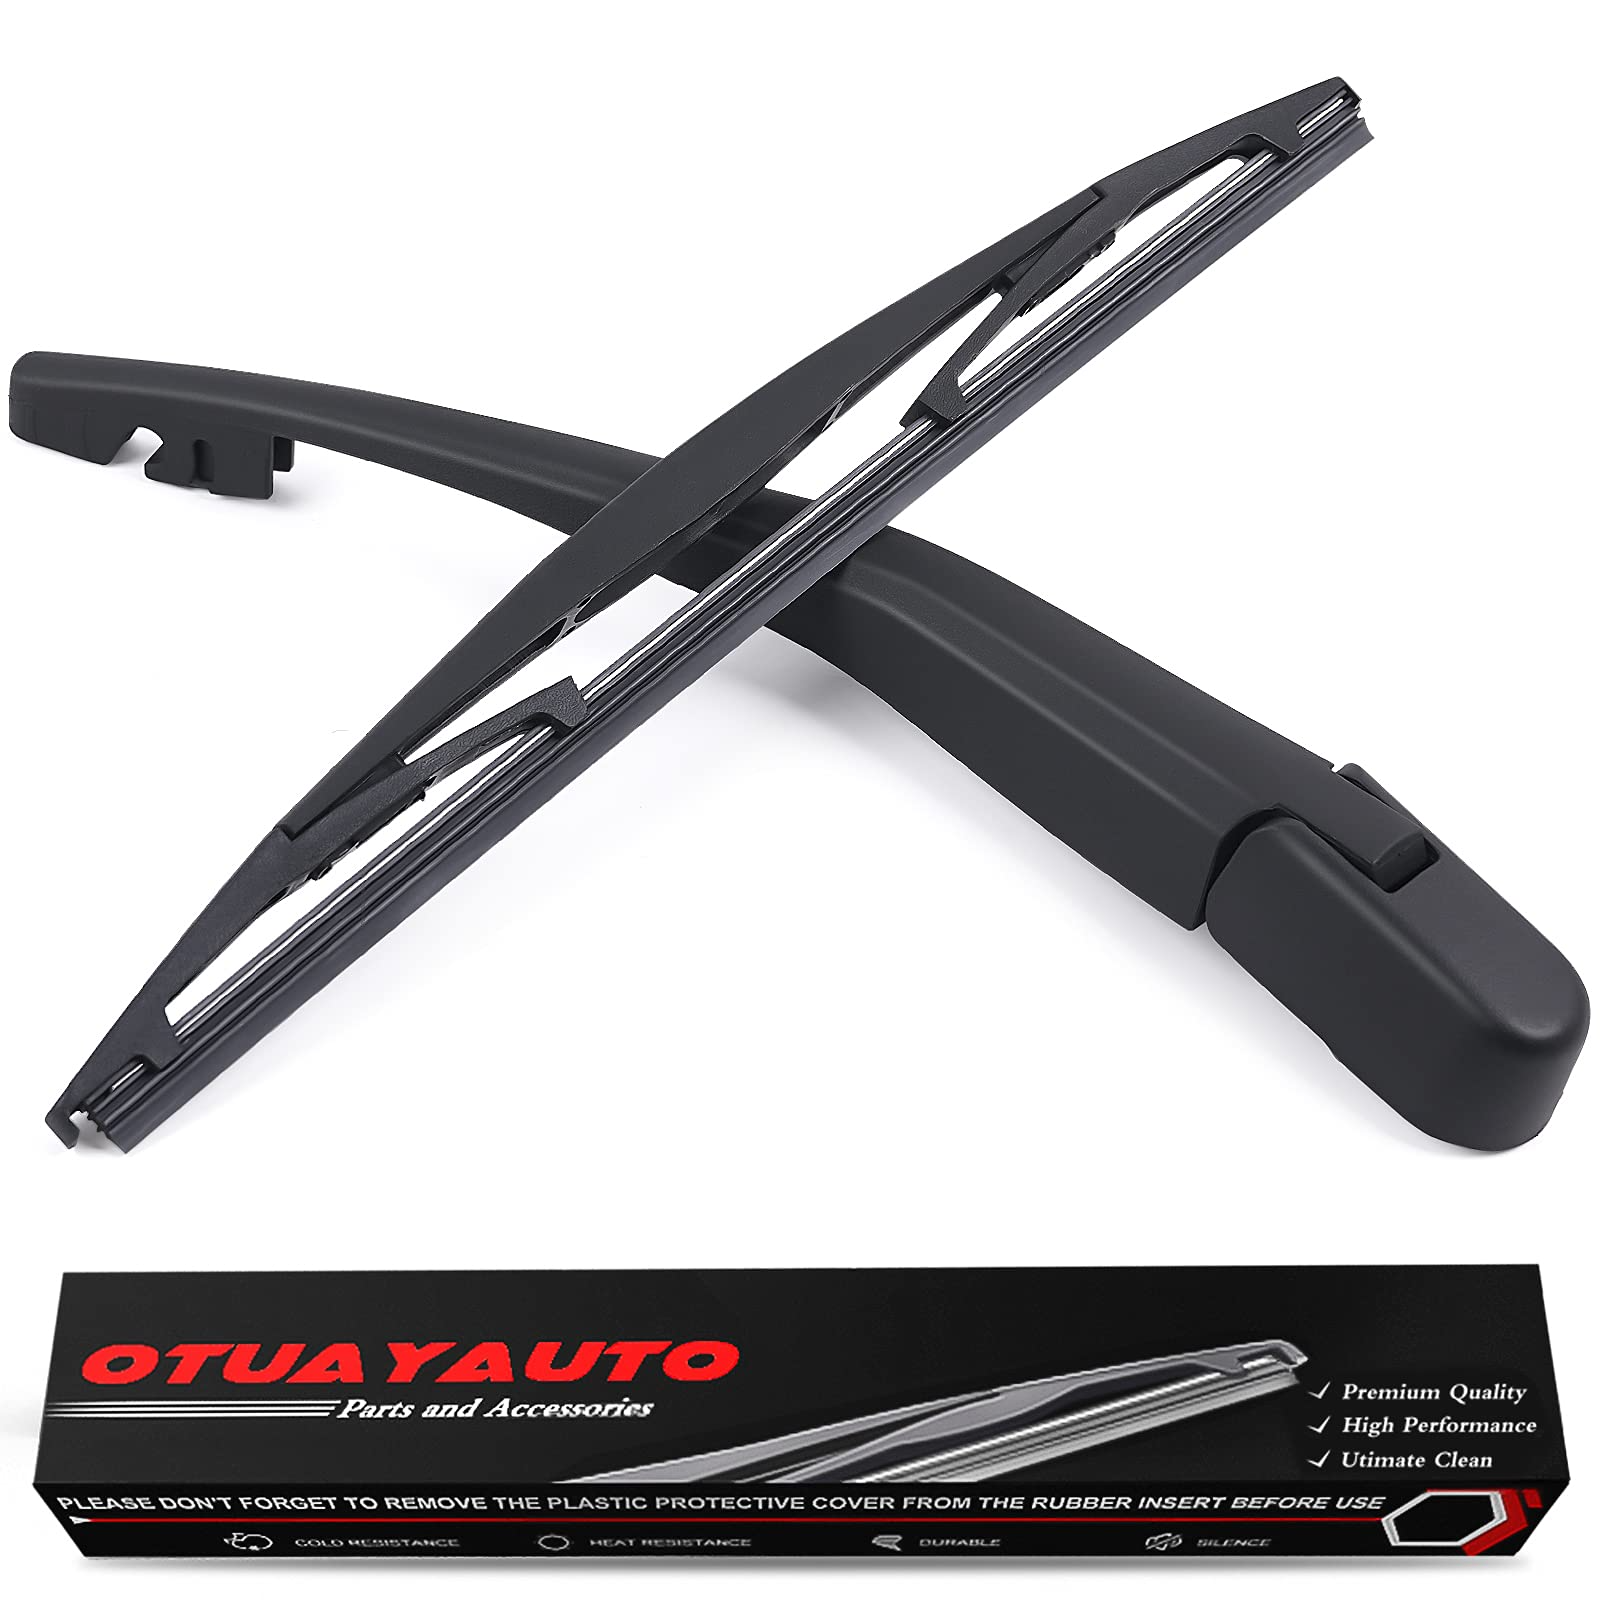 Replacement for Nissan Xterra 2005-2015, Rear Windshield Back Wiper Arm blade Set - OTUAYAUTO Factory OEM Replacement 28781-EA000